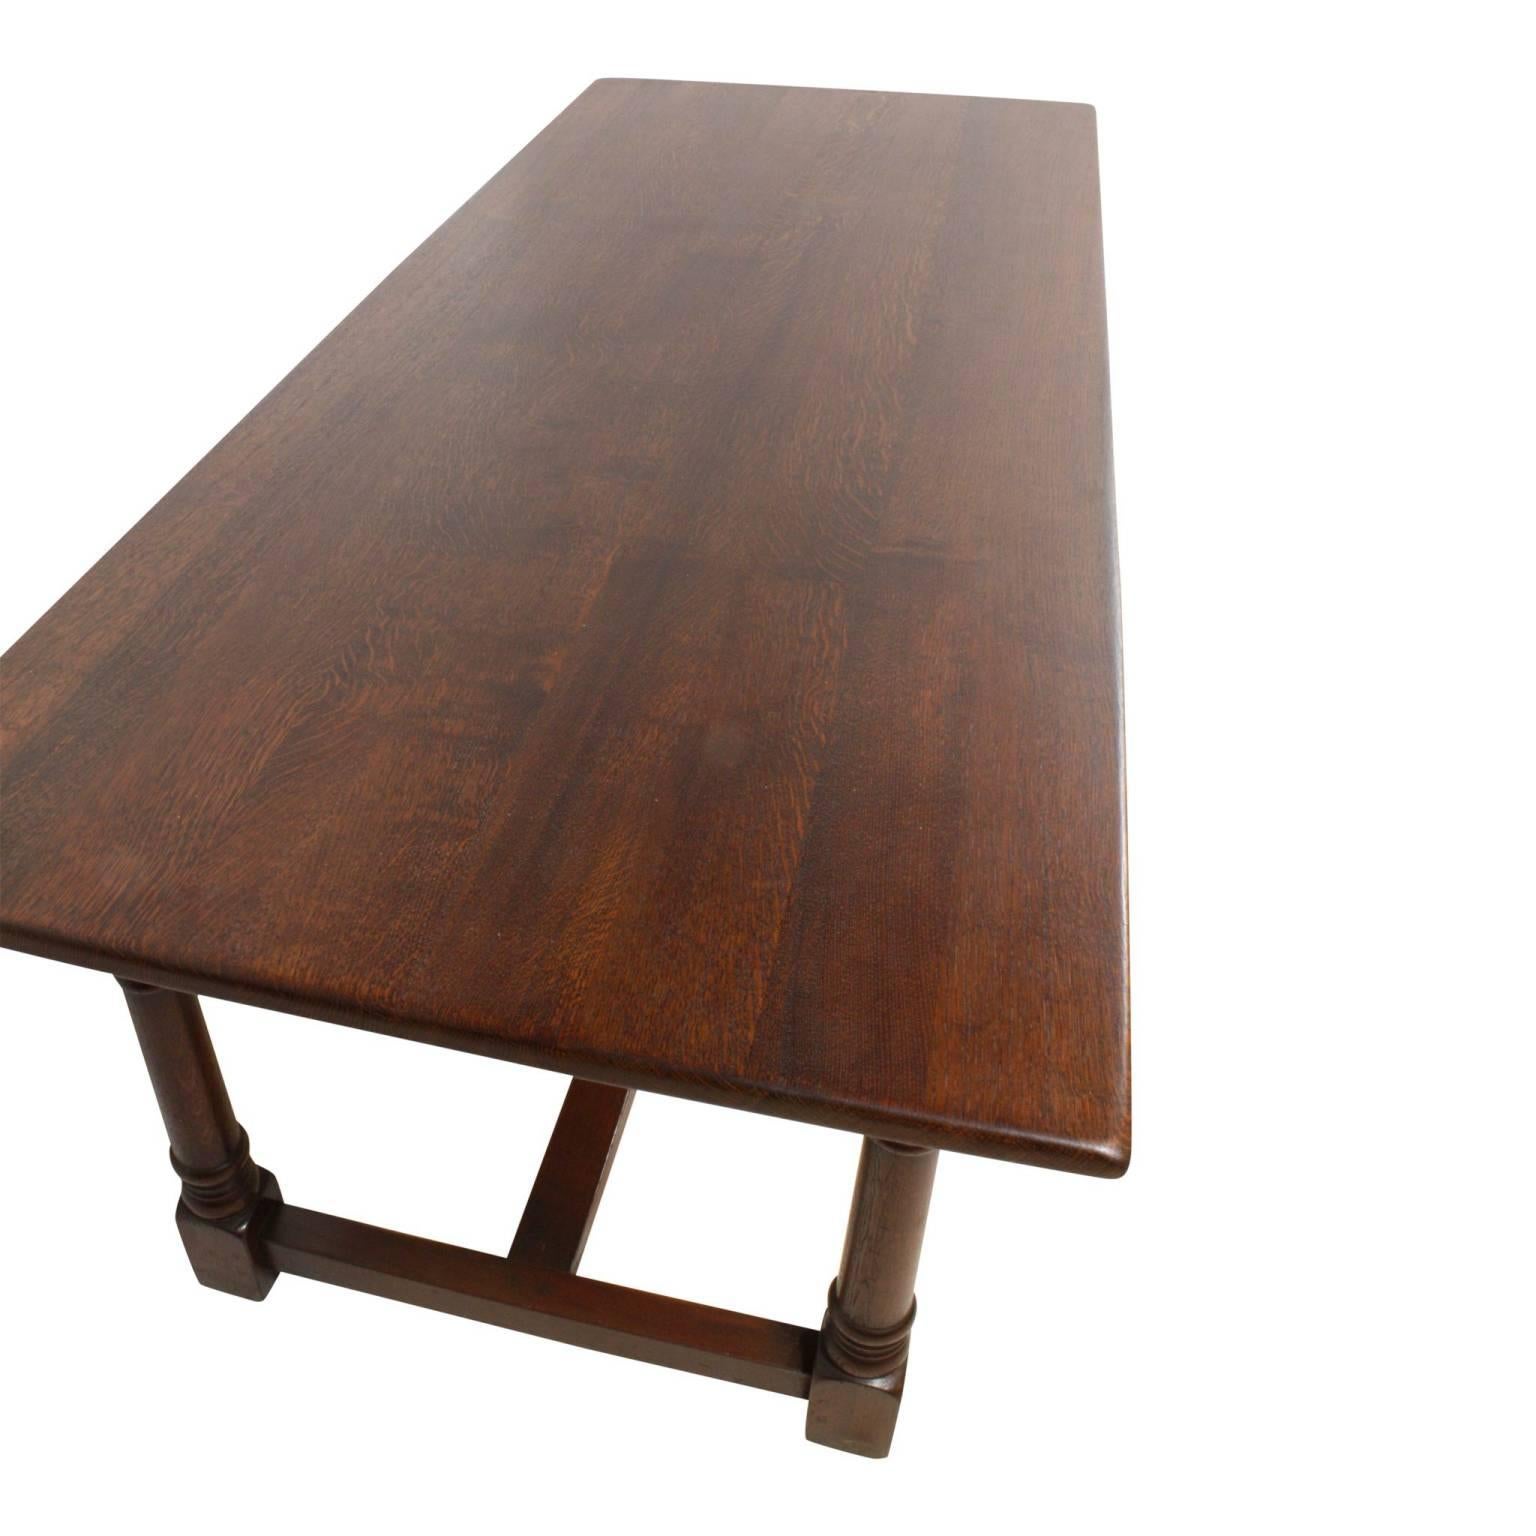 Belgian Mid-20th Century Oak Dining Room Table with Eight Leather Chairs